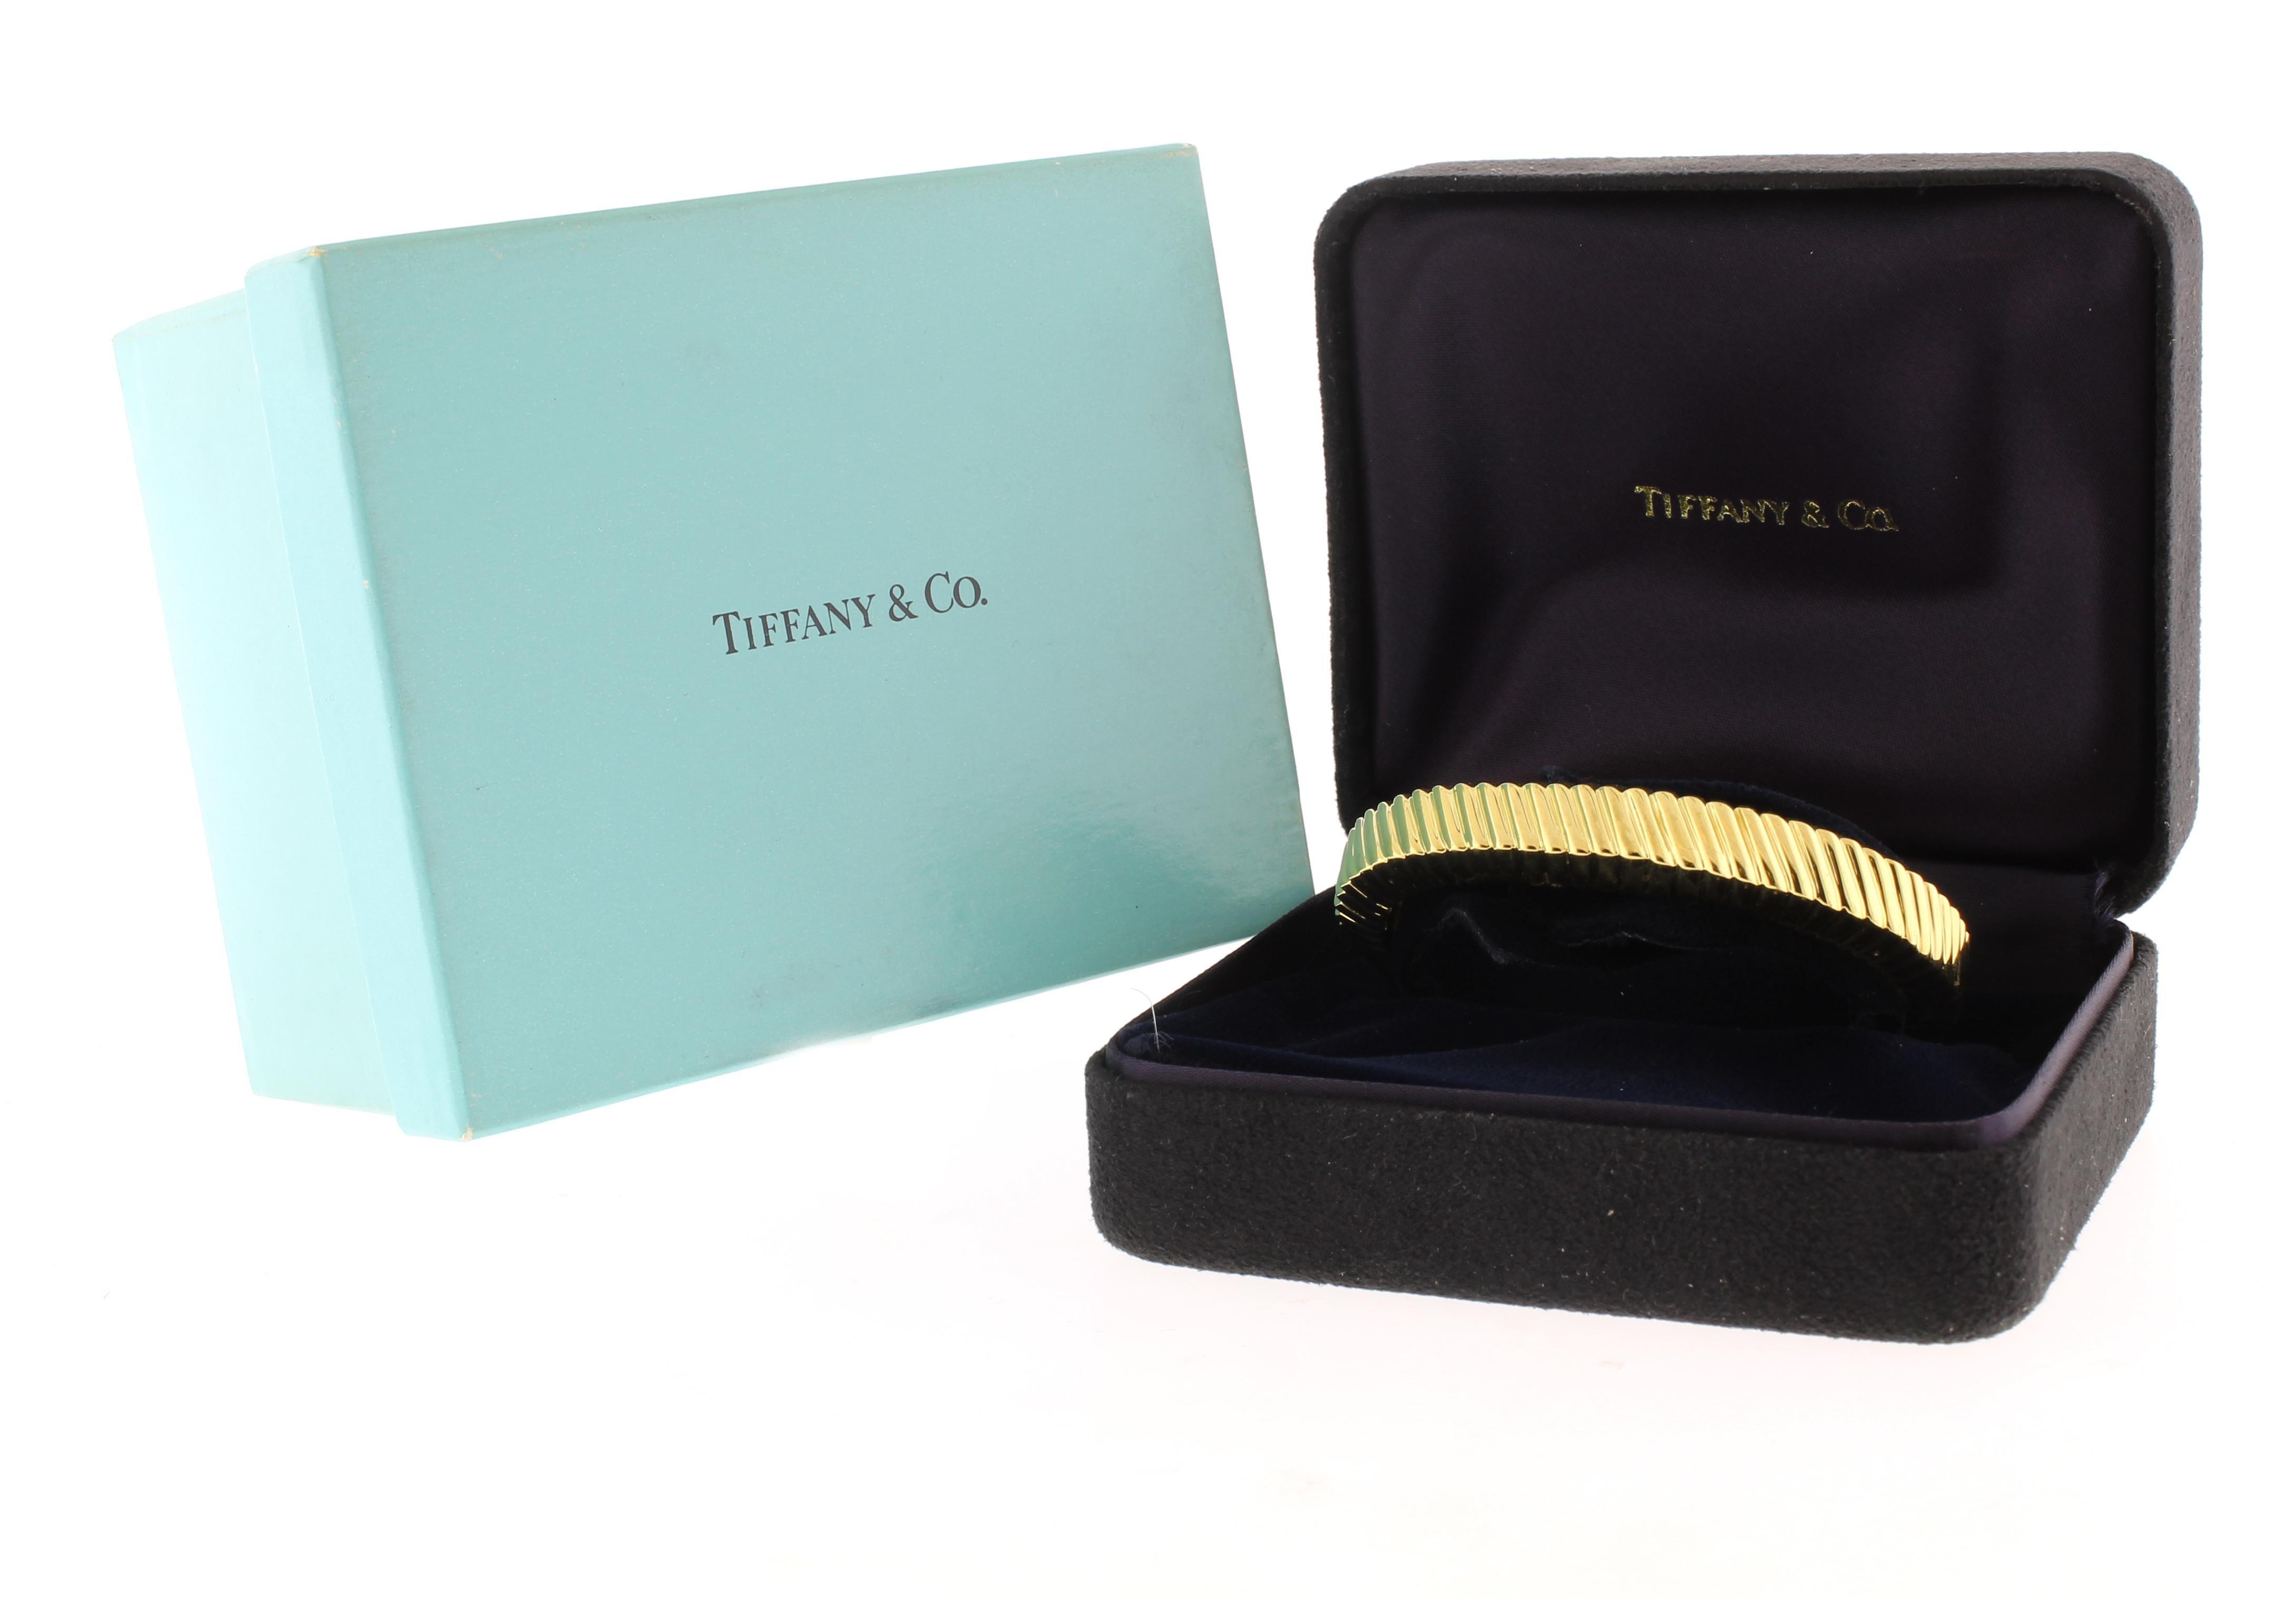 This cuff bracelet crafted by Tiffany & Co. is stamped 1998 as the year it was made.
♦ Designer: Tiffany & Co.
♦ Metal: 18 Karat Yellow Gold
♦ Circa: 1998
♦ Inner Diameter: 2 1/4 inches
♦ Size: fits a 6 to 6 1/4 inch wrist
♦ Width: 1/2 inch
♦ 